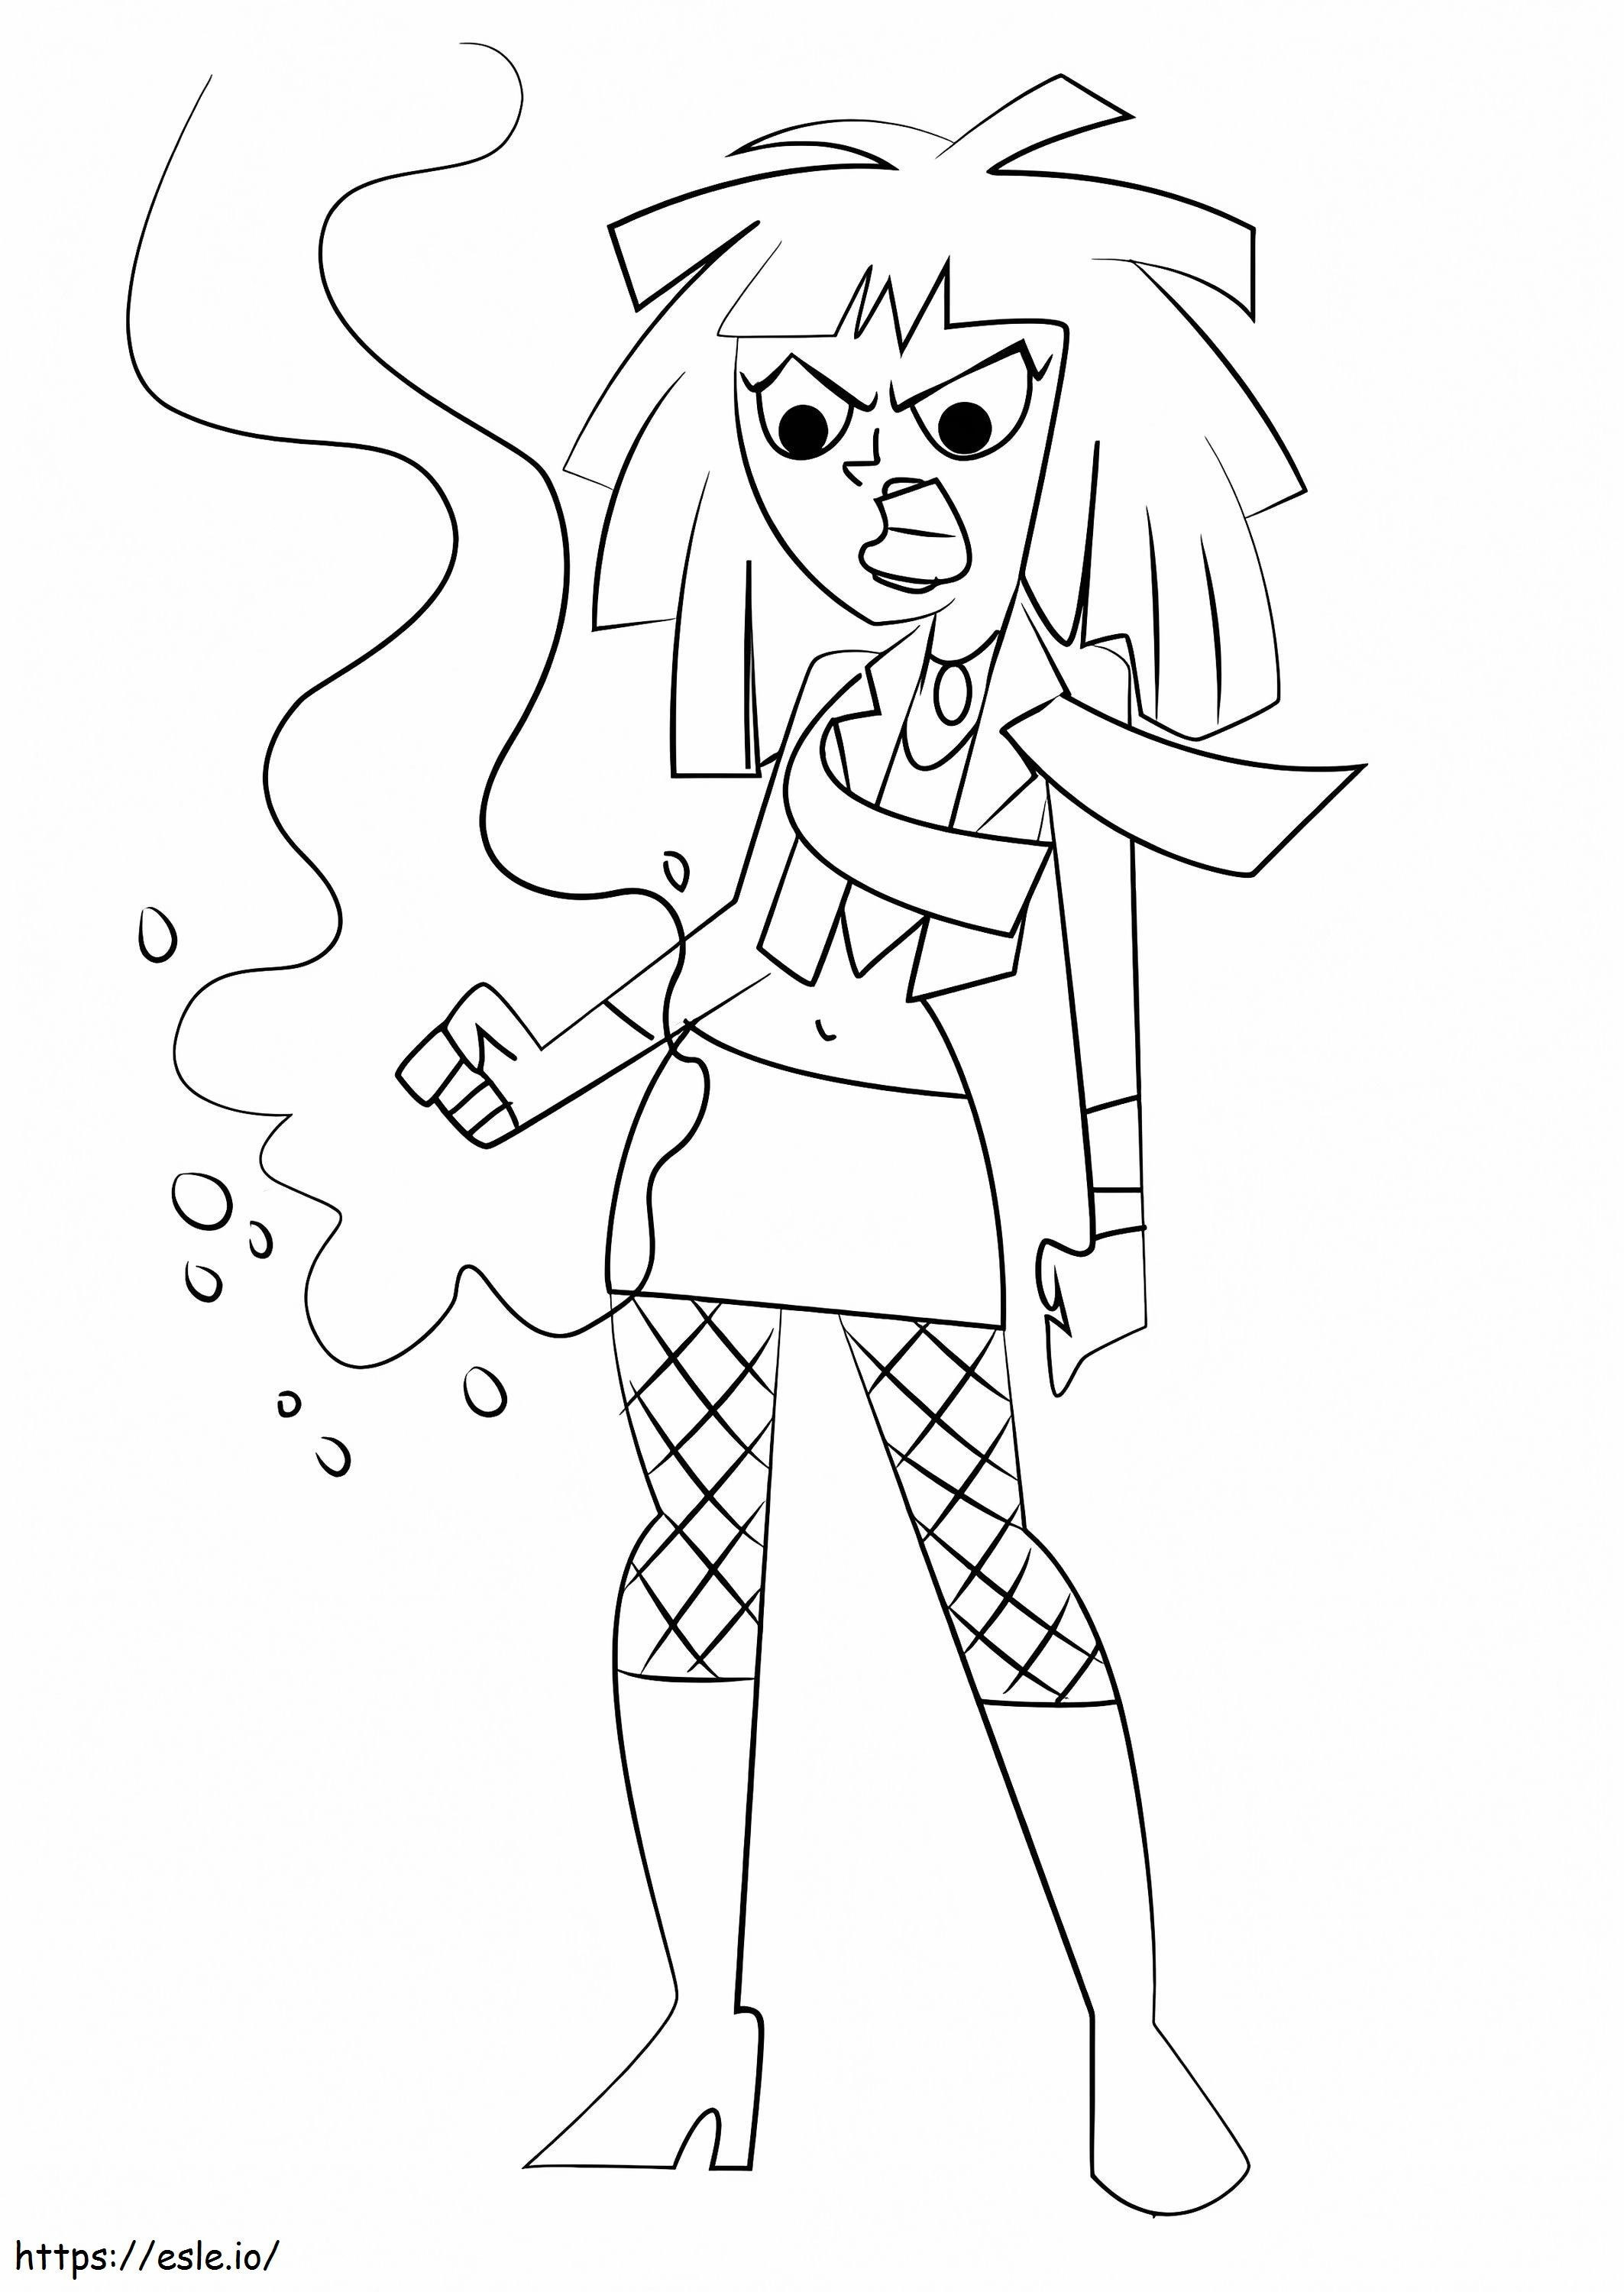 Kitty From Danny Phantom coloring page